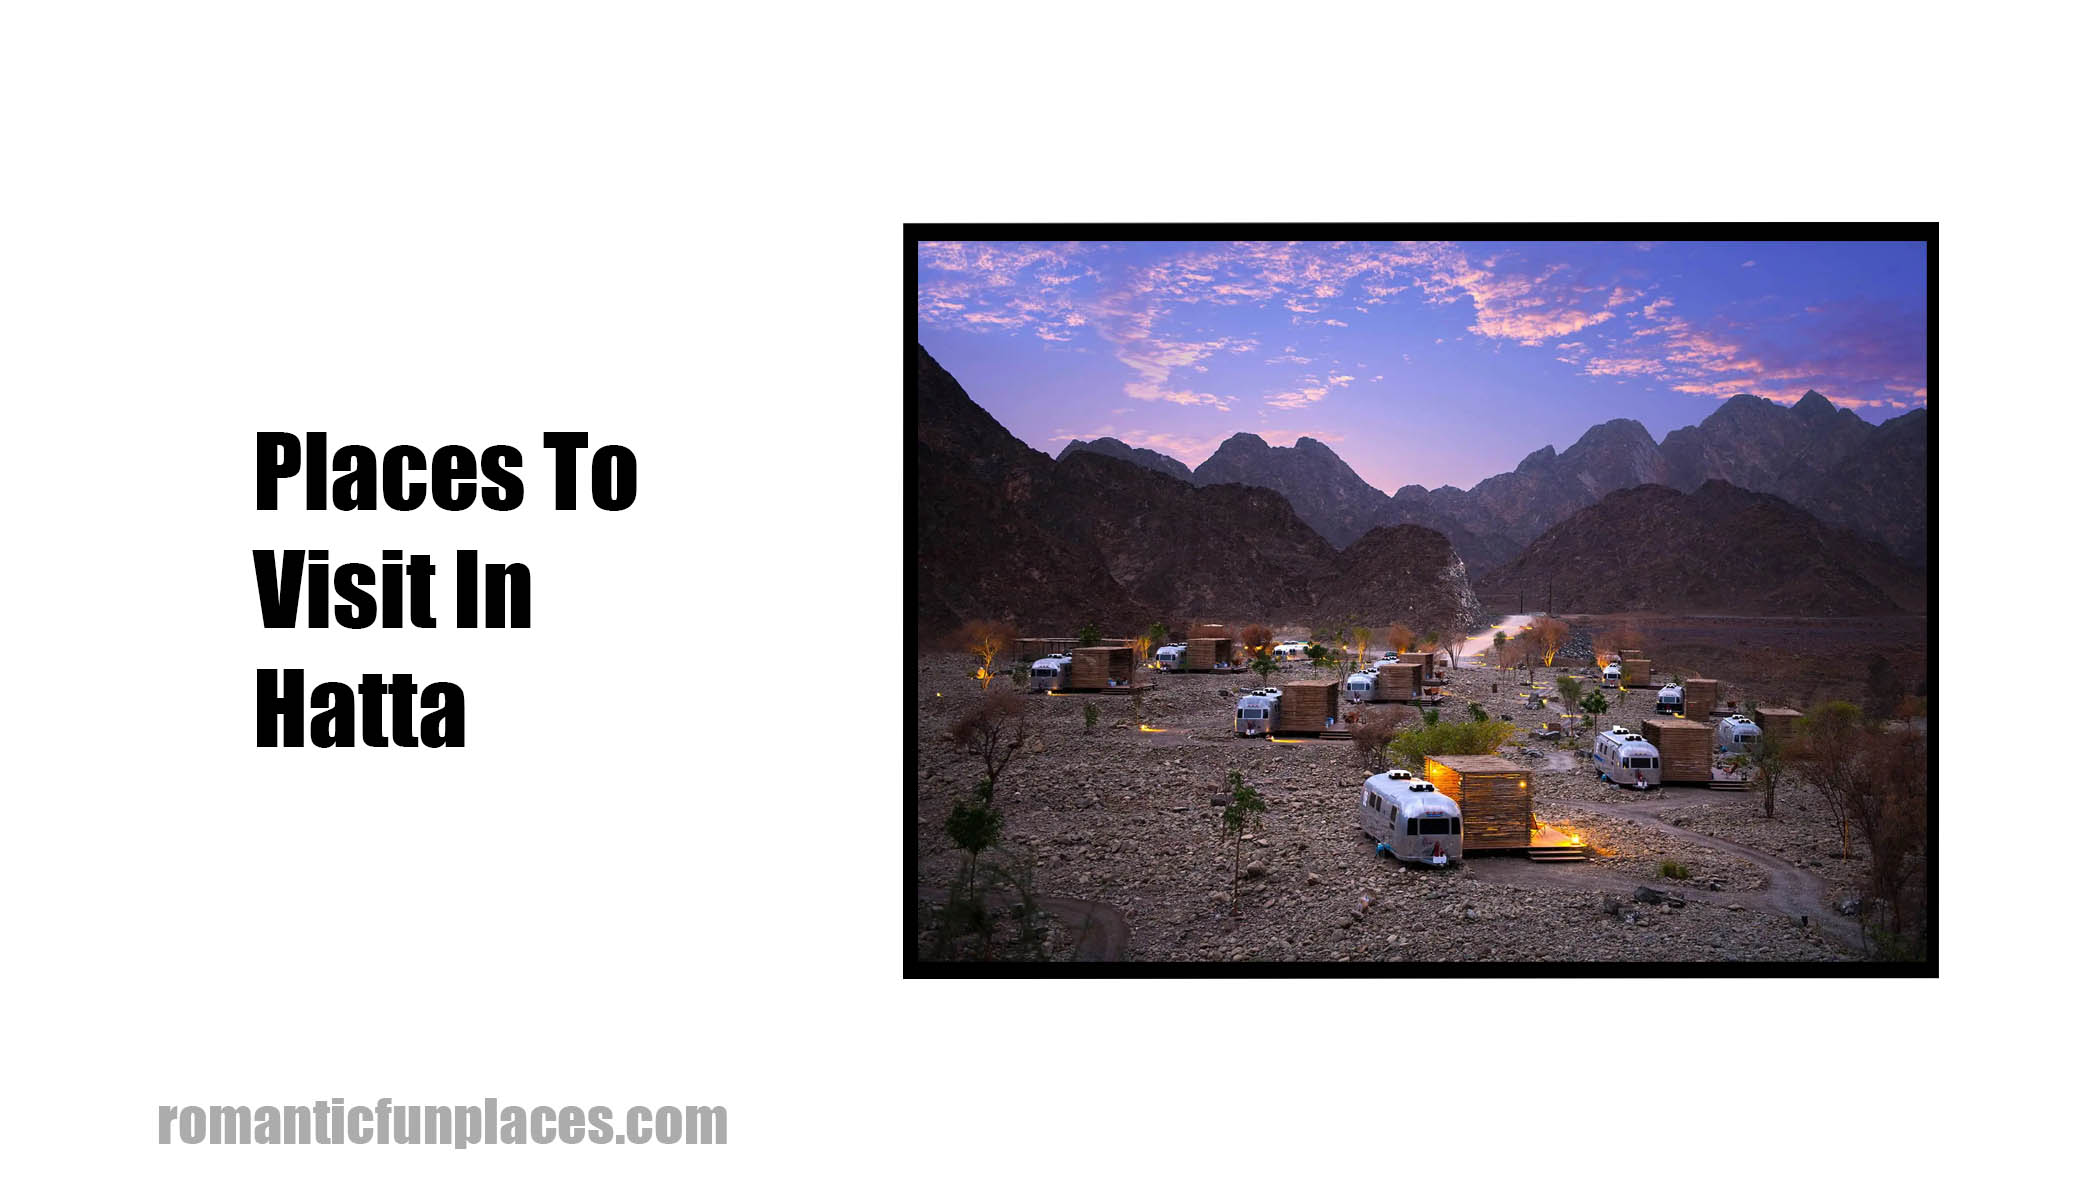 Places To Visit In Hatta